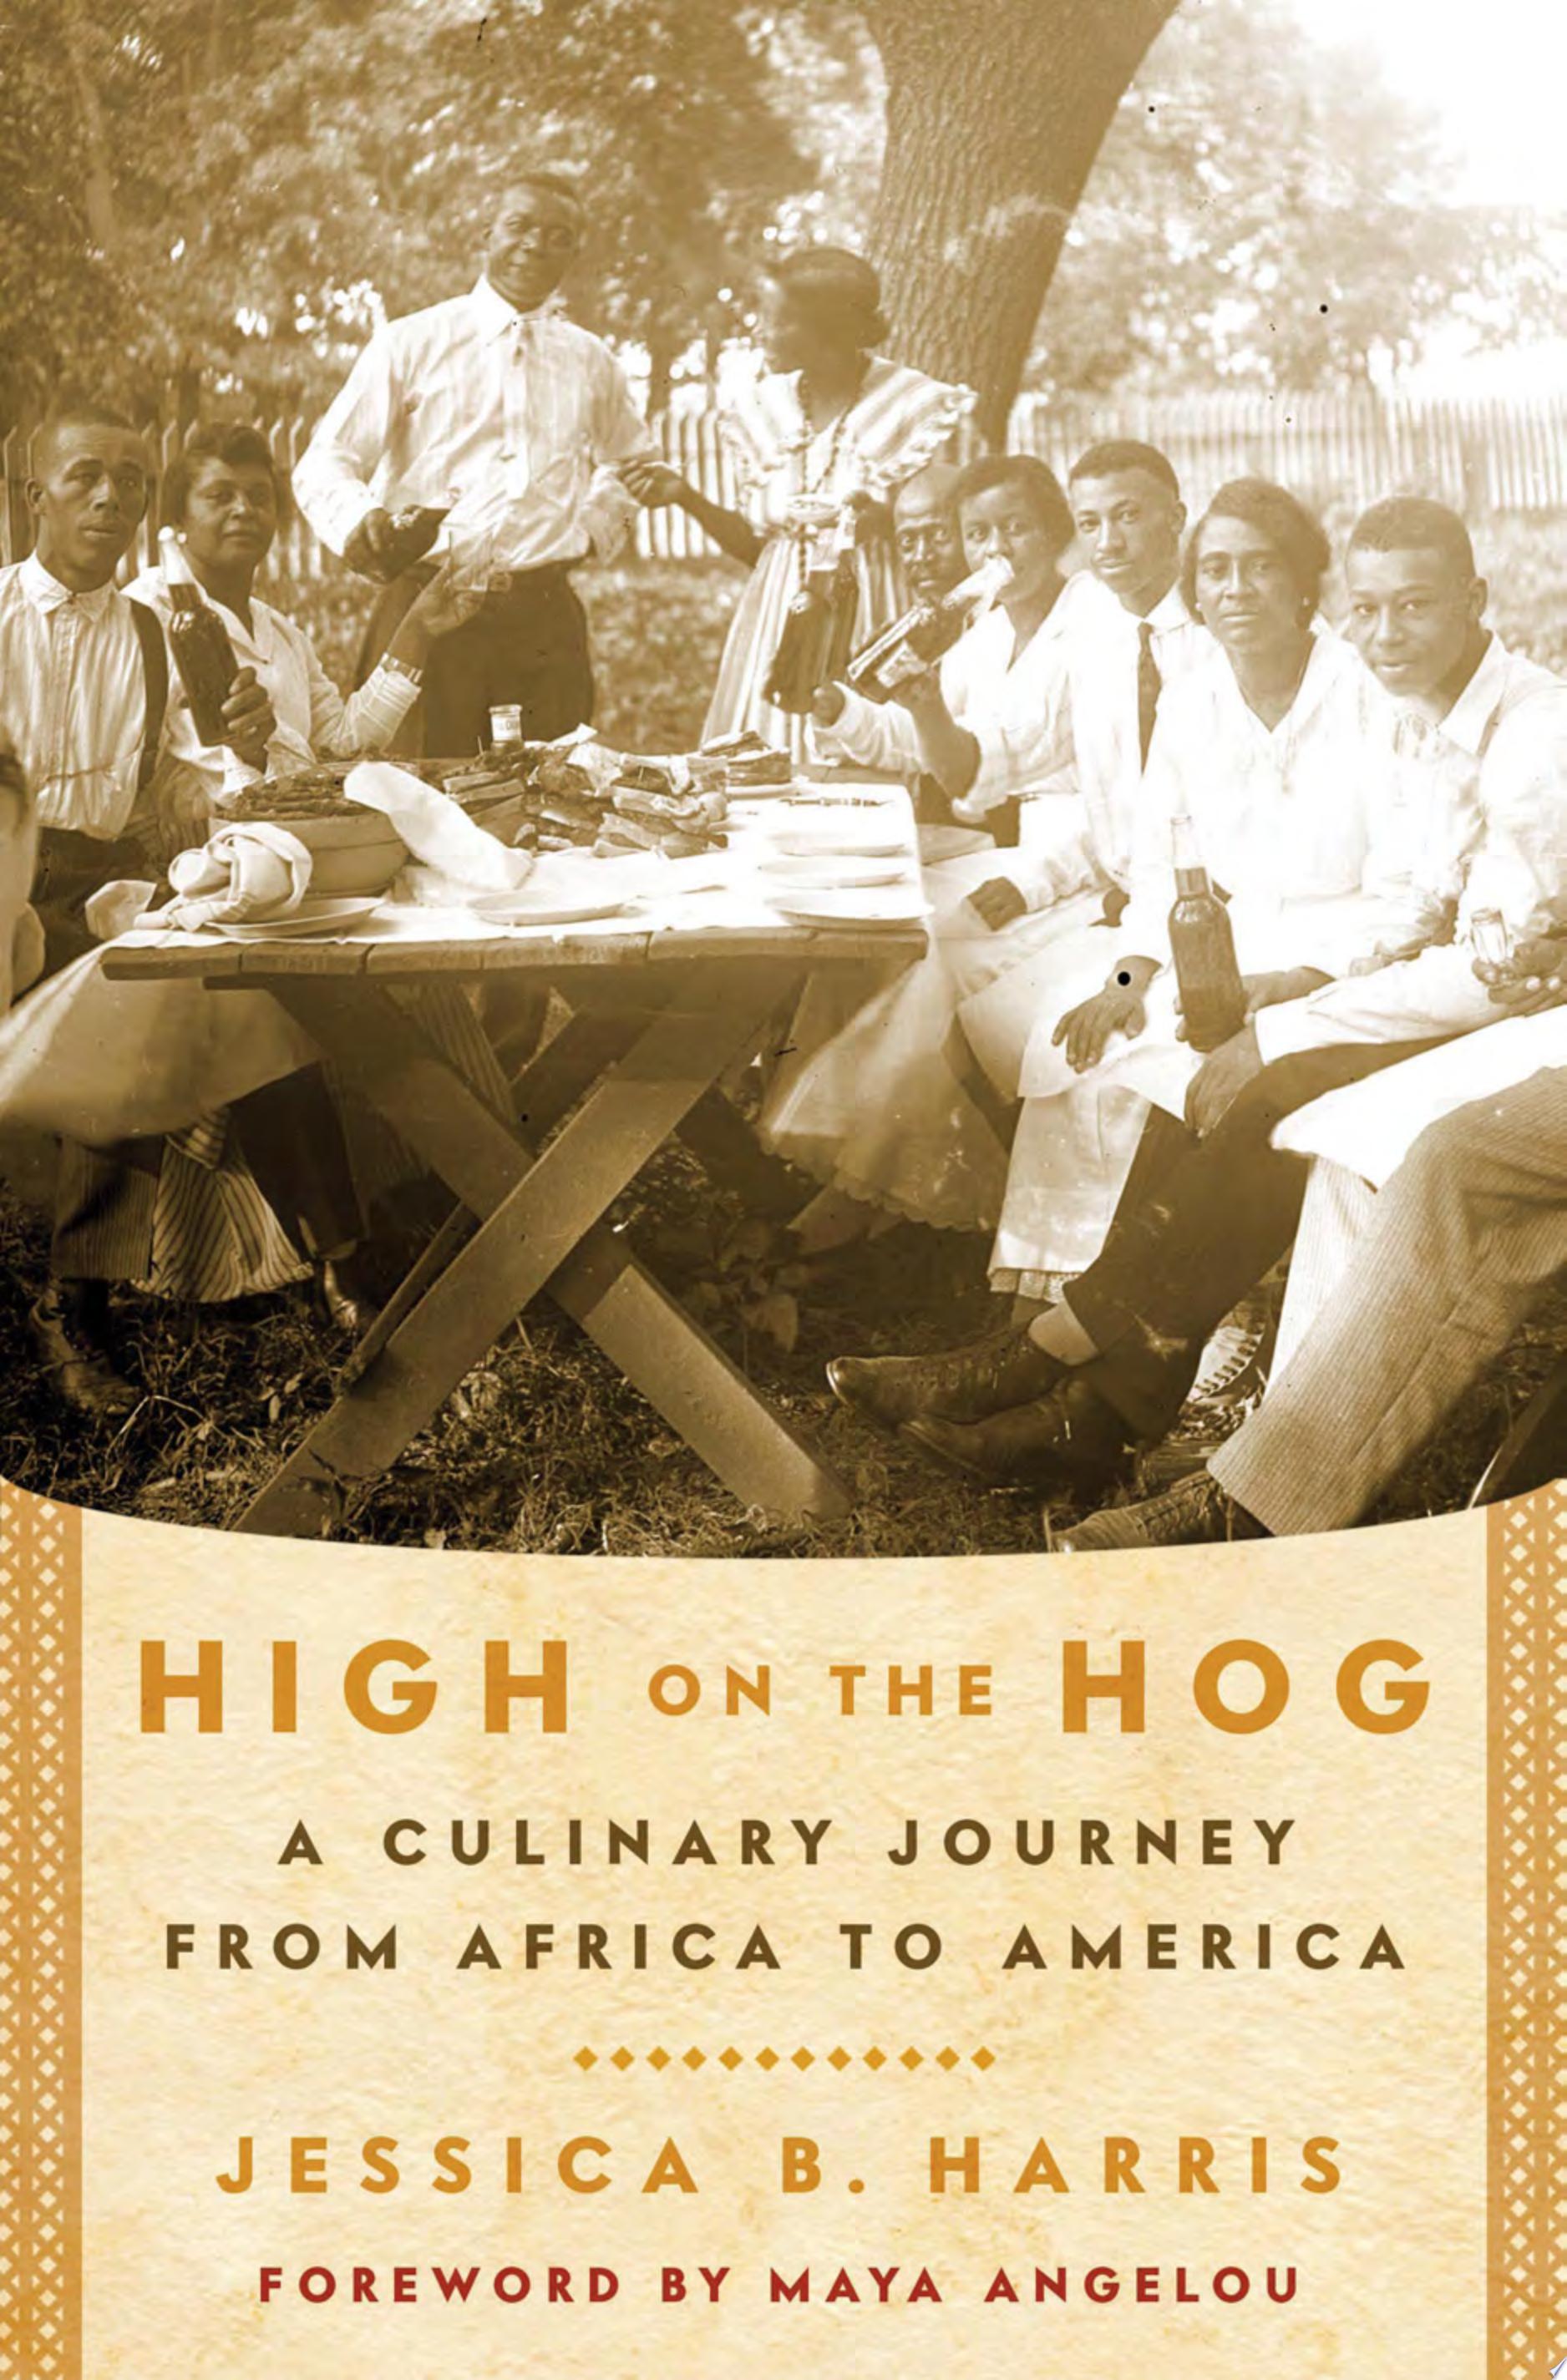 Image for "High on the Hog"